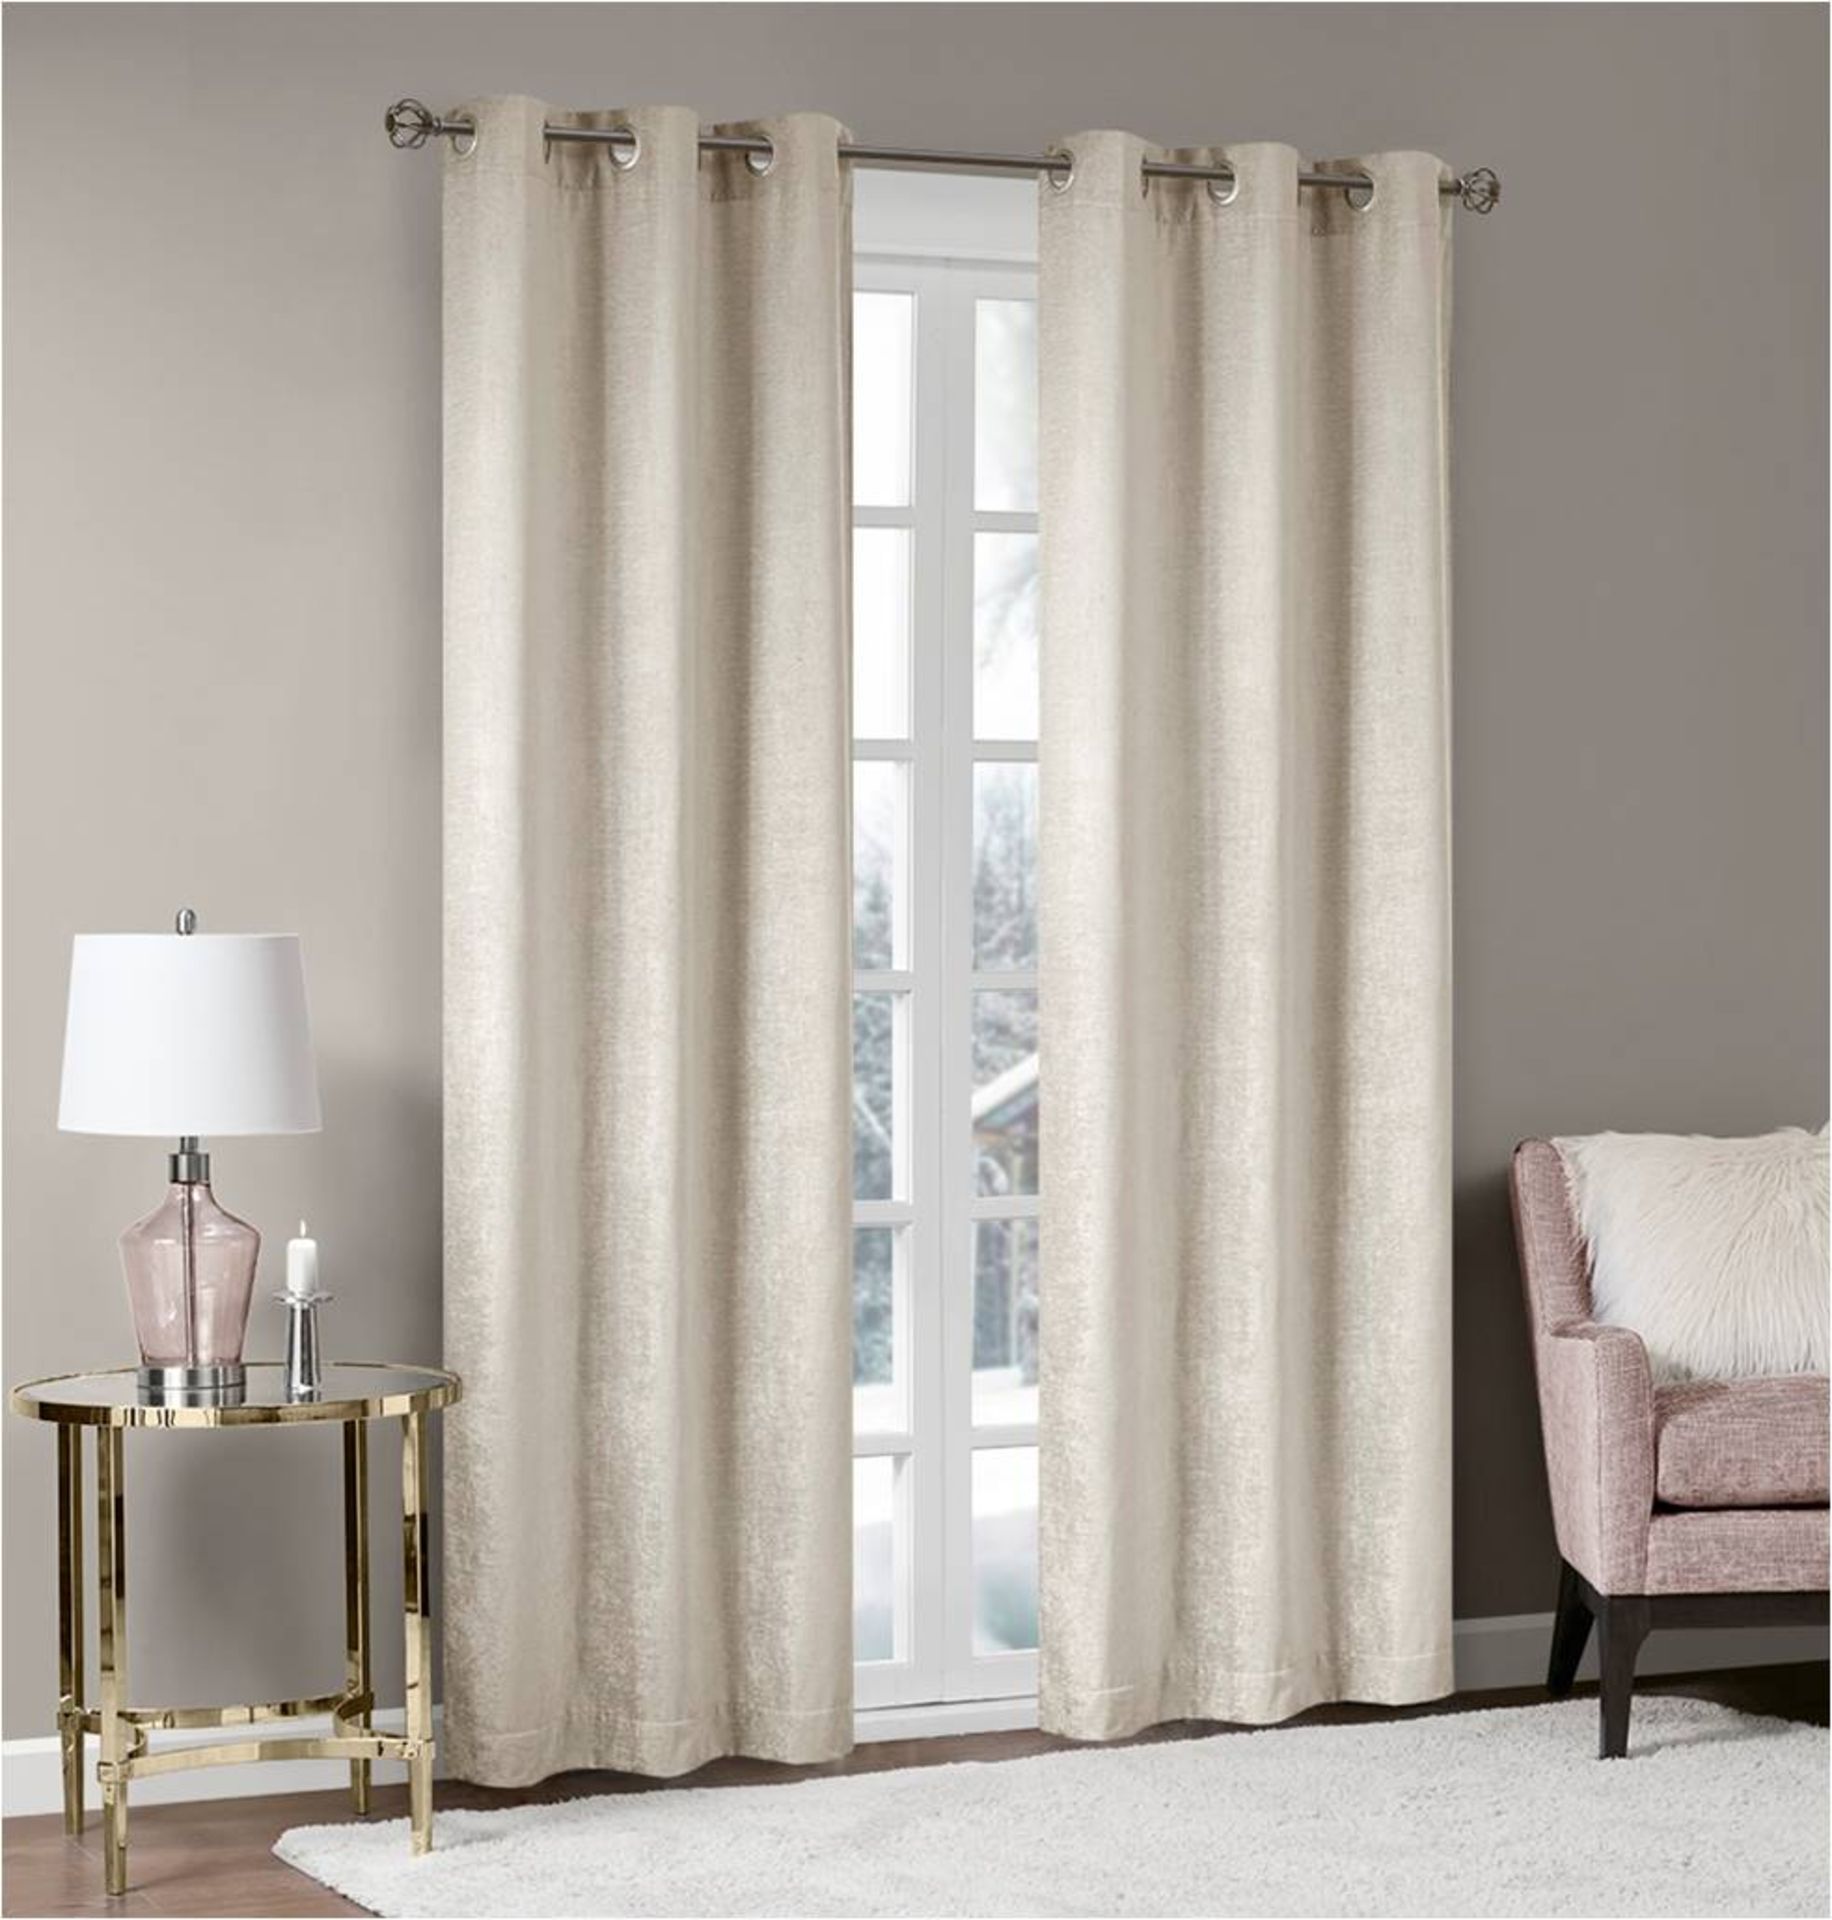 1 x Set of Madison Park Palazzo Chenille Ivory Curtains 90x90" - Product Code MP40-0303UK (Brand New